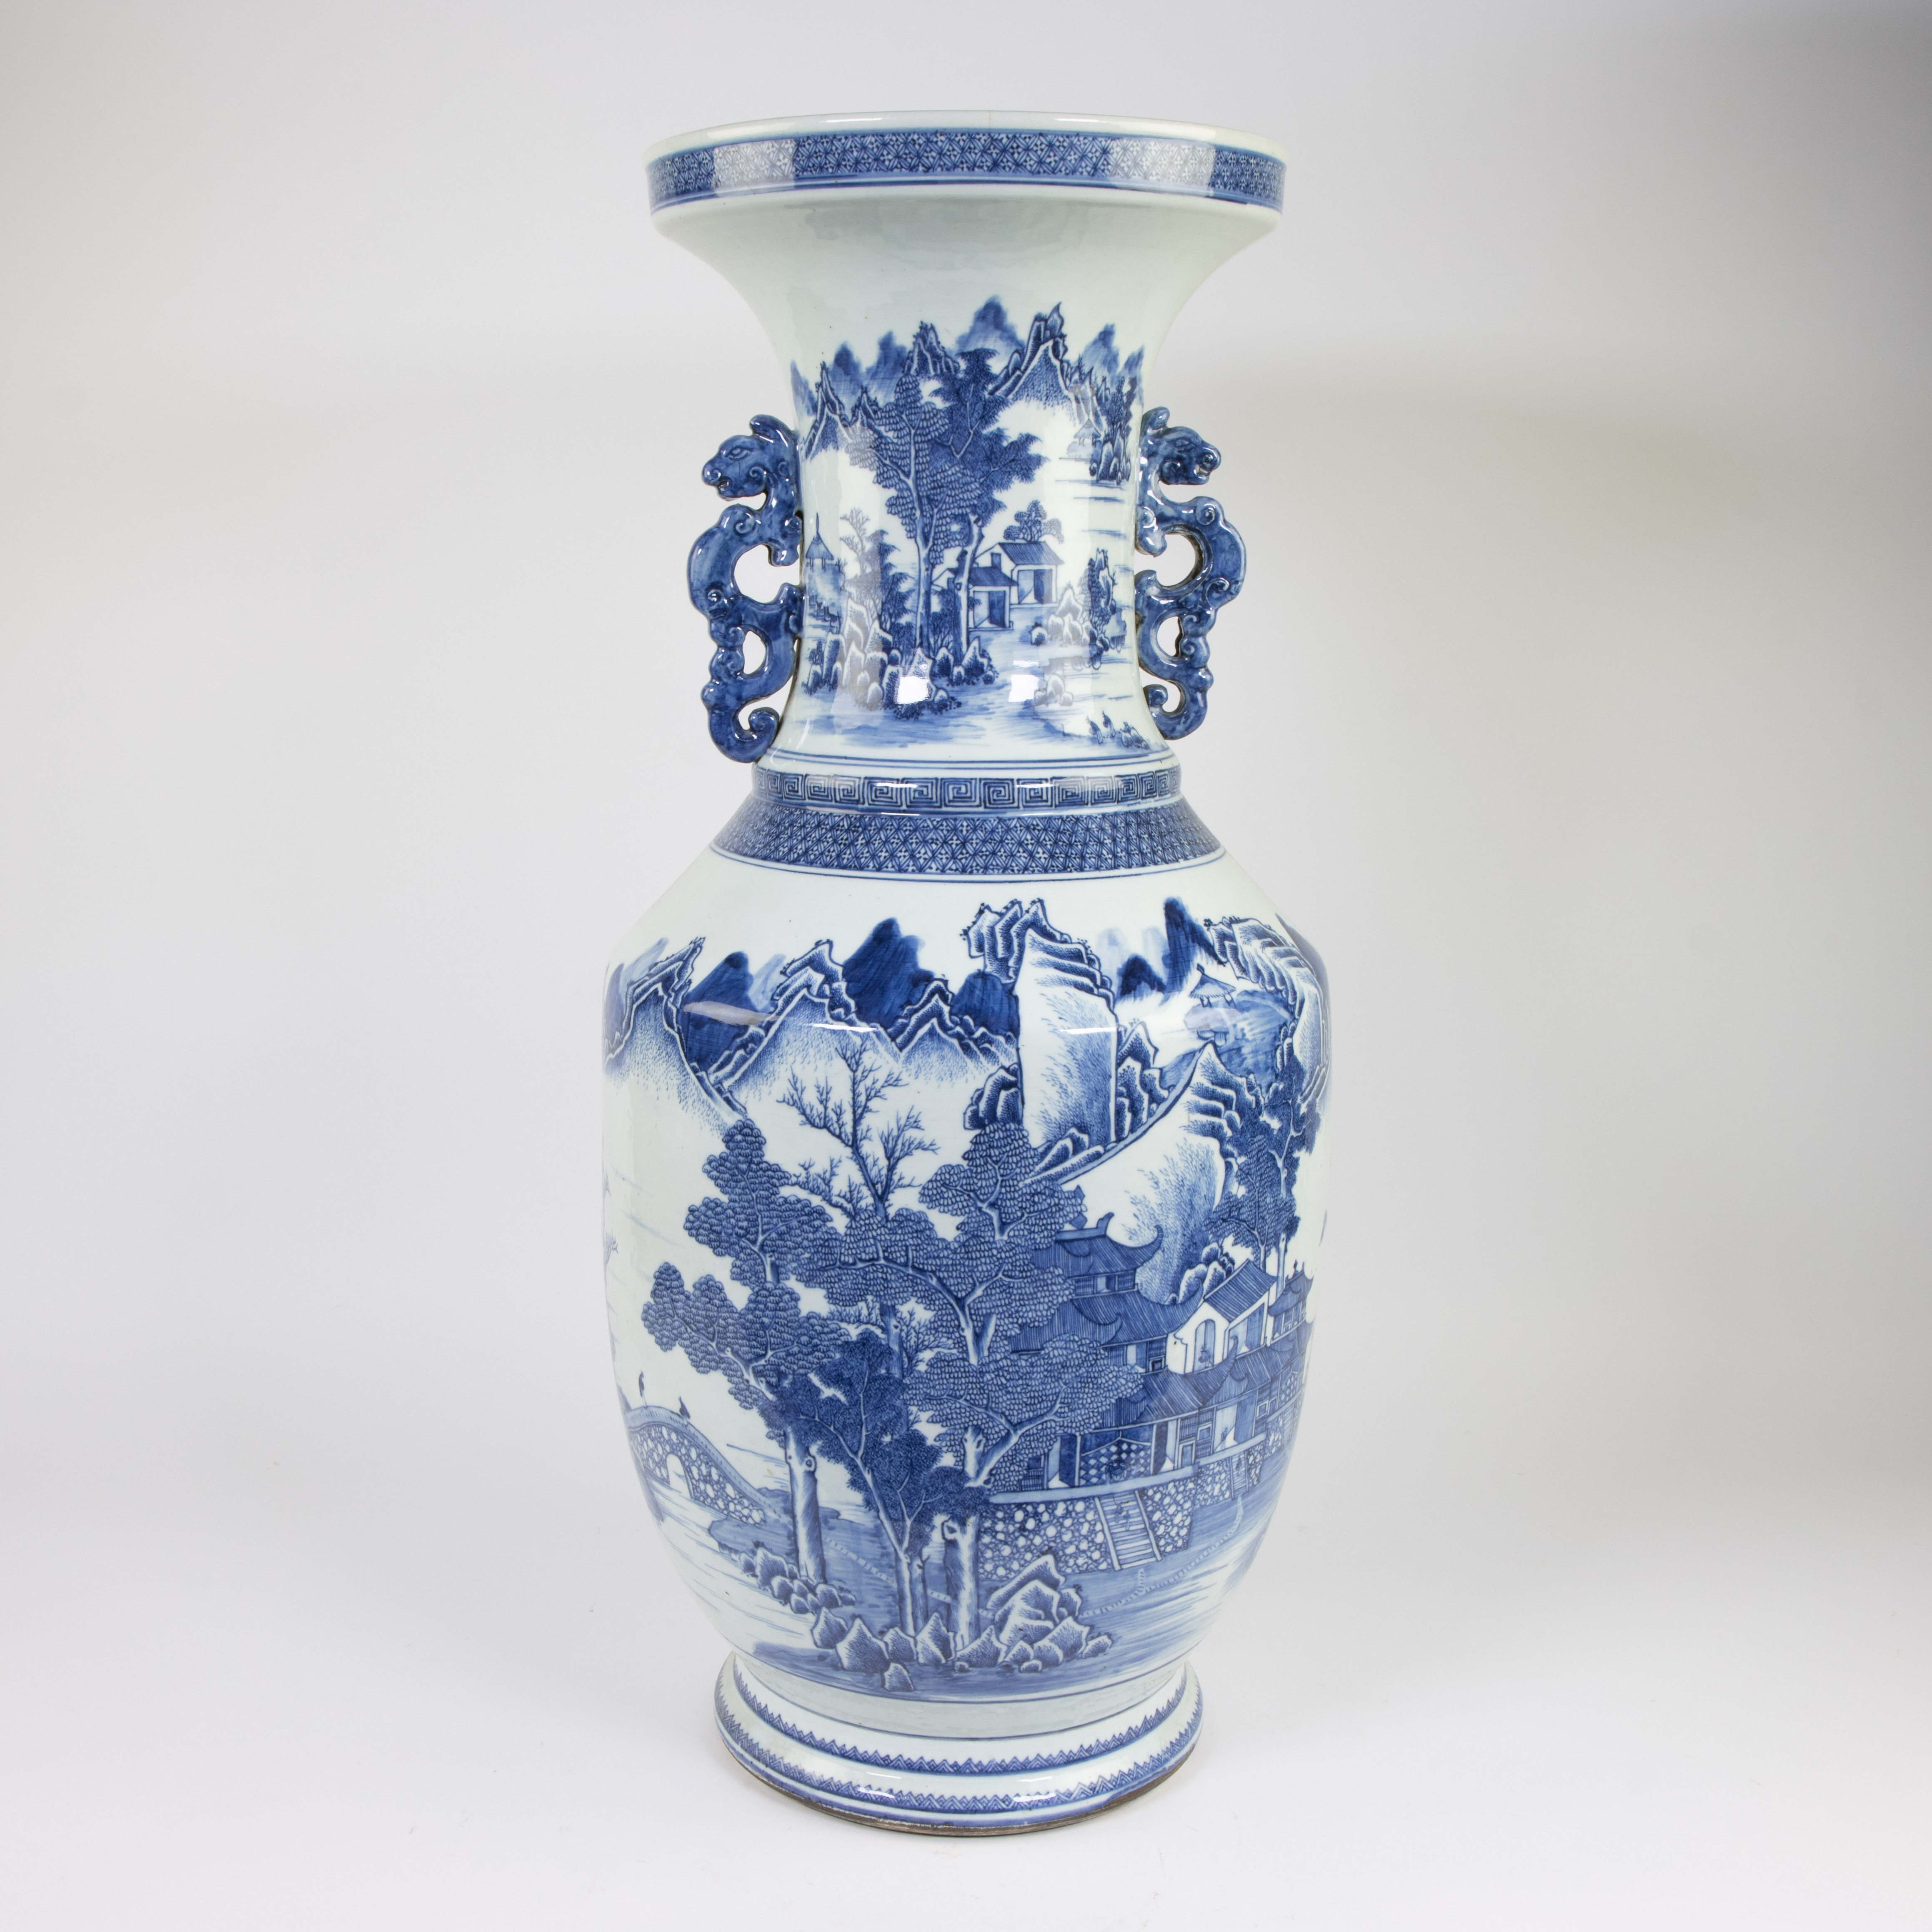 Large Chinese vase blue/white with floral mountain decor, late 19th century